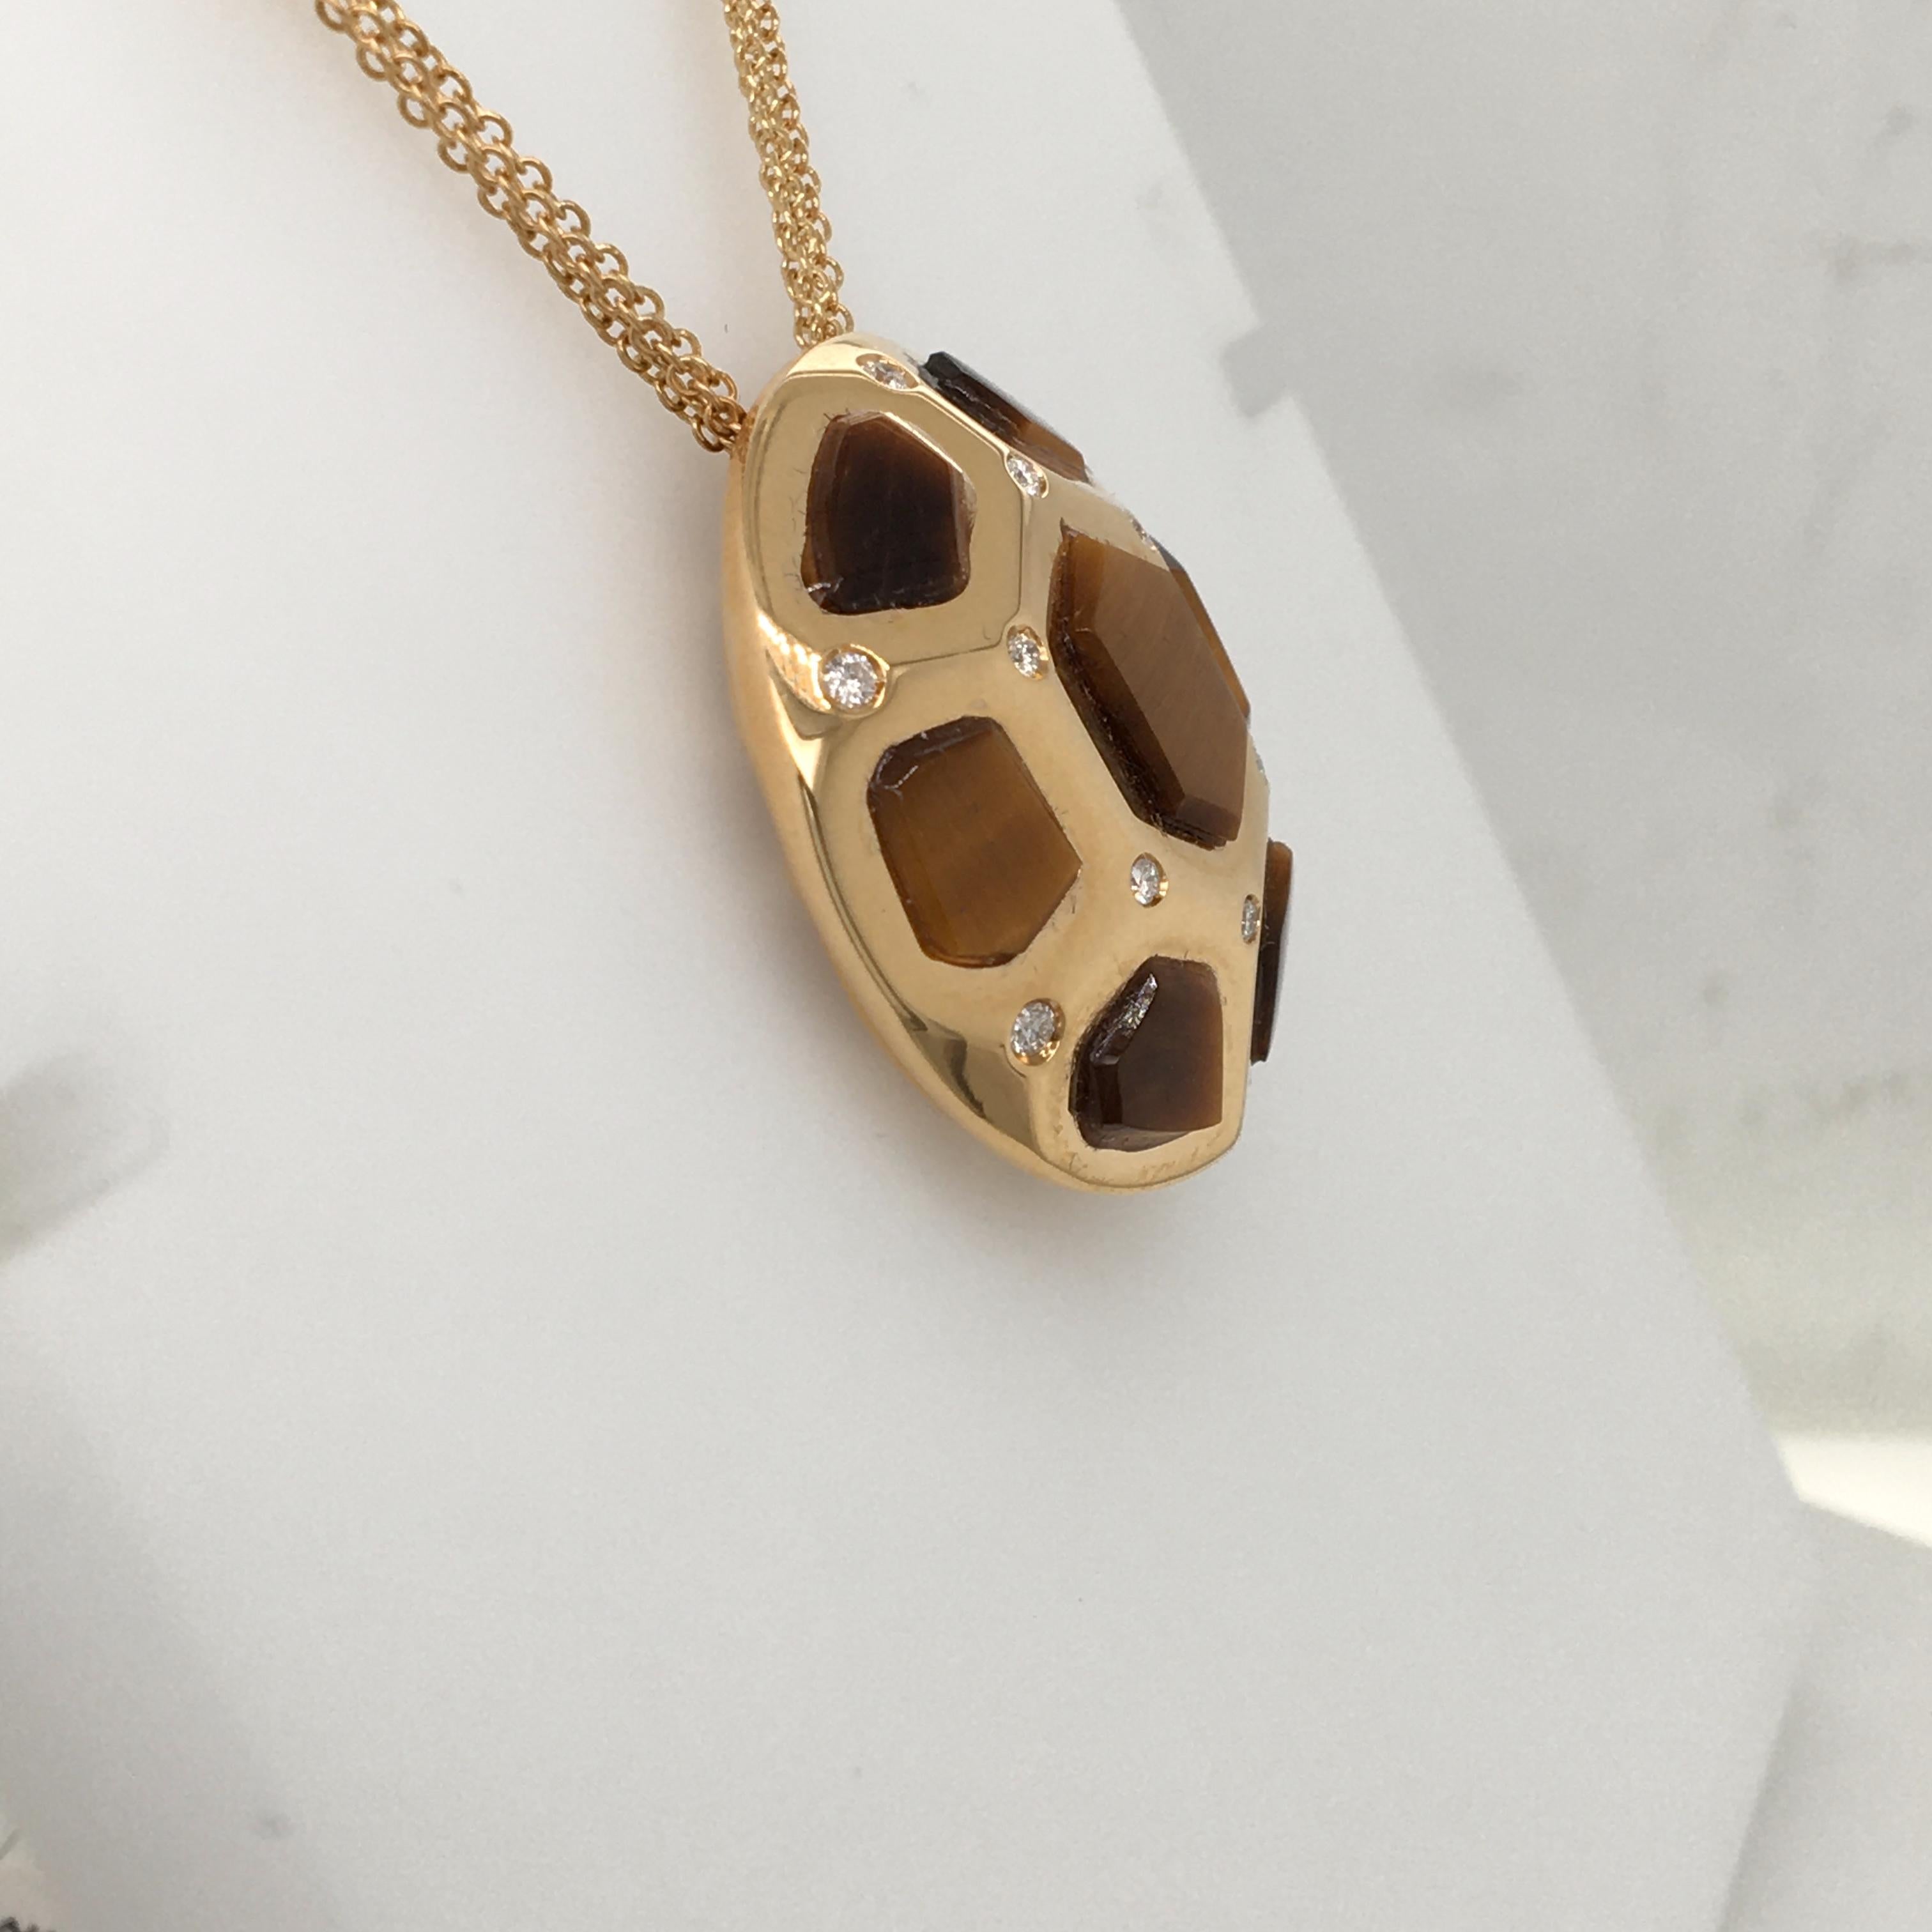 18 Karat yellow gold pendent  set with diamonds and tiger eye stones, tiger eye have been recut on the exact size of the frame, the pendent has a very nice gallery on the back, with multichain (3 chains) Made In Italy, comes in a box, chain length